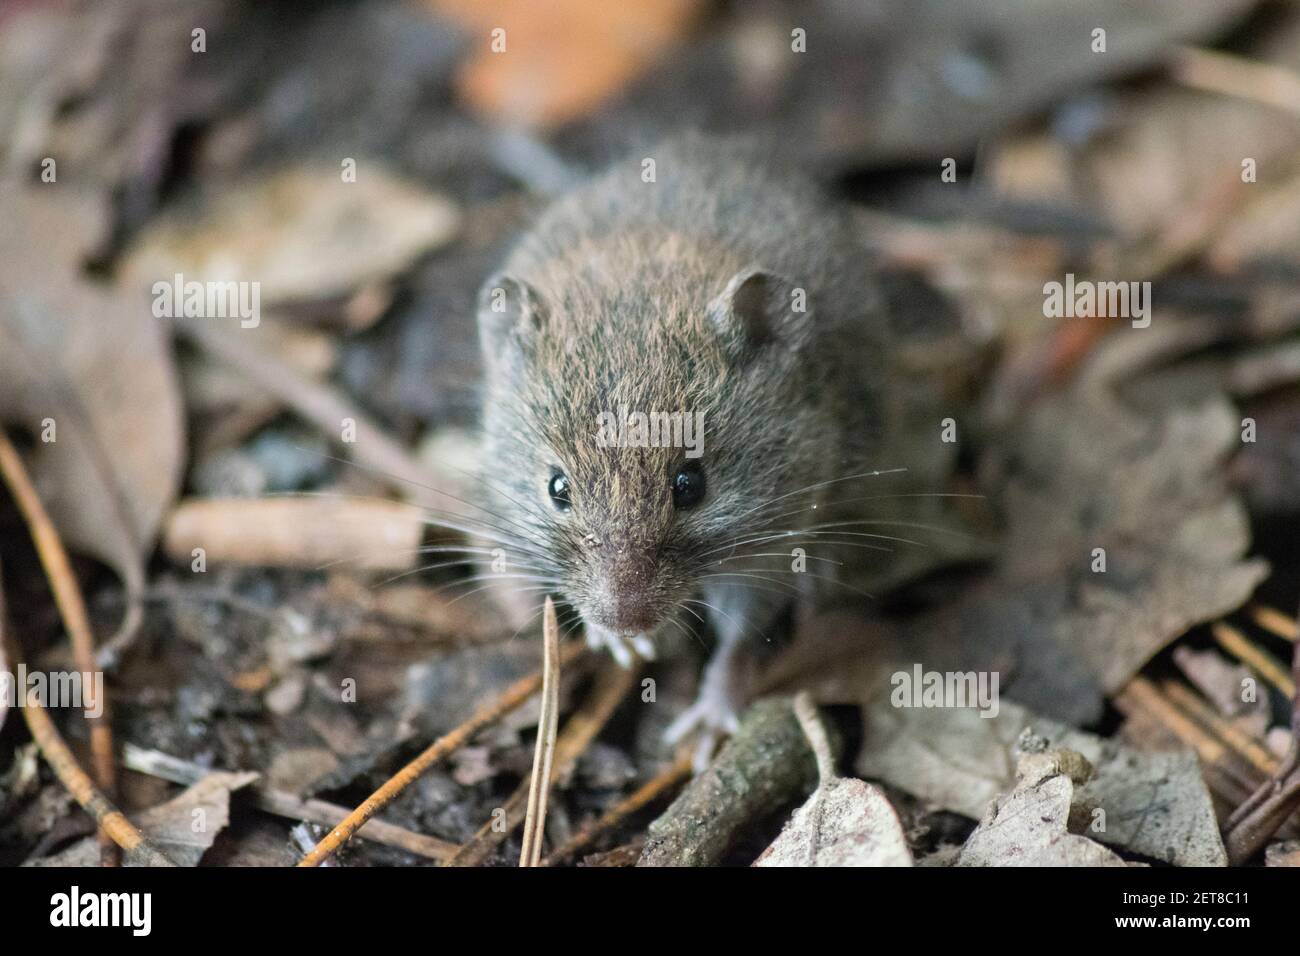 Timid little mouse searching for food Stock Photo